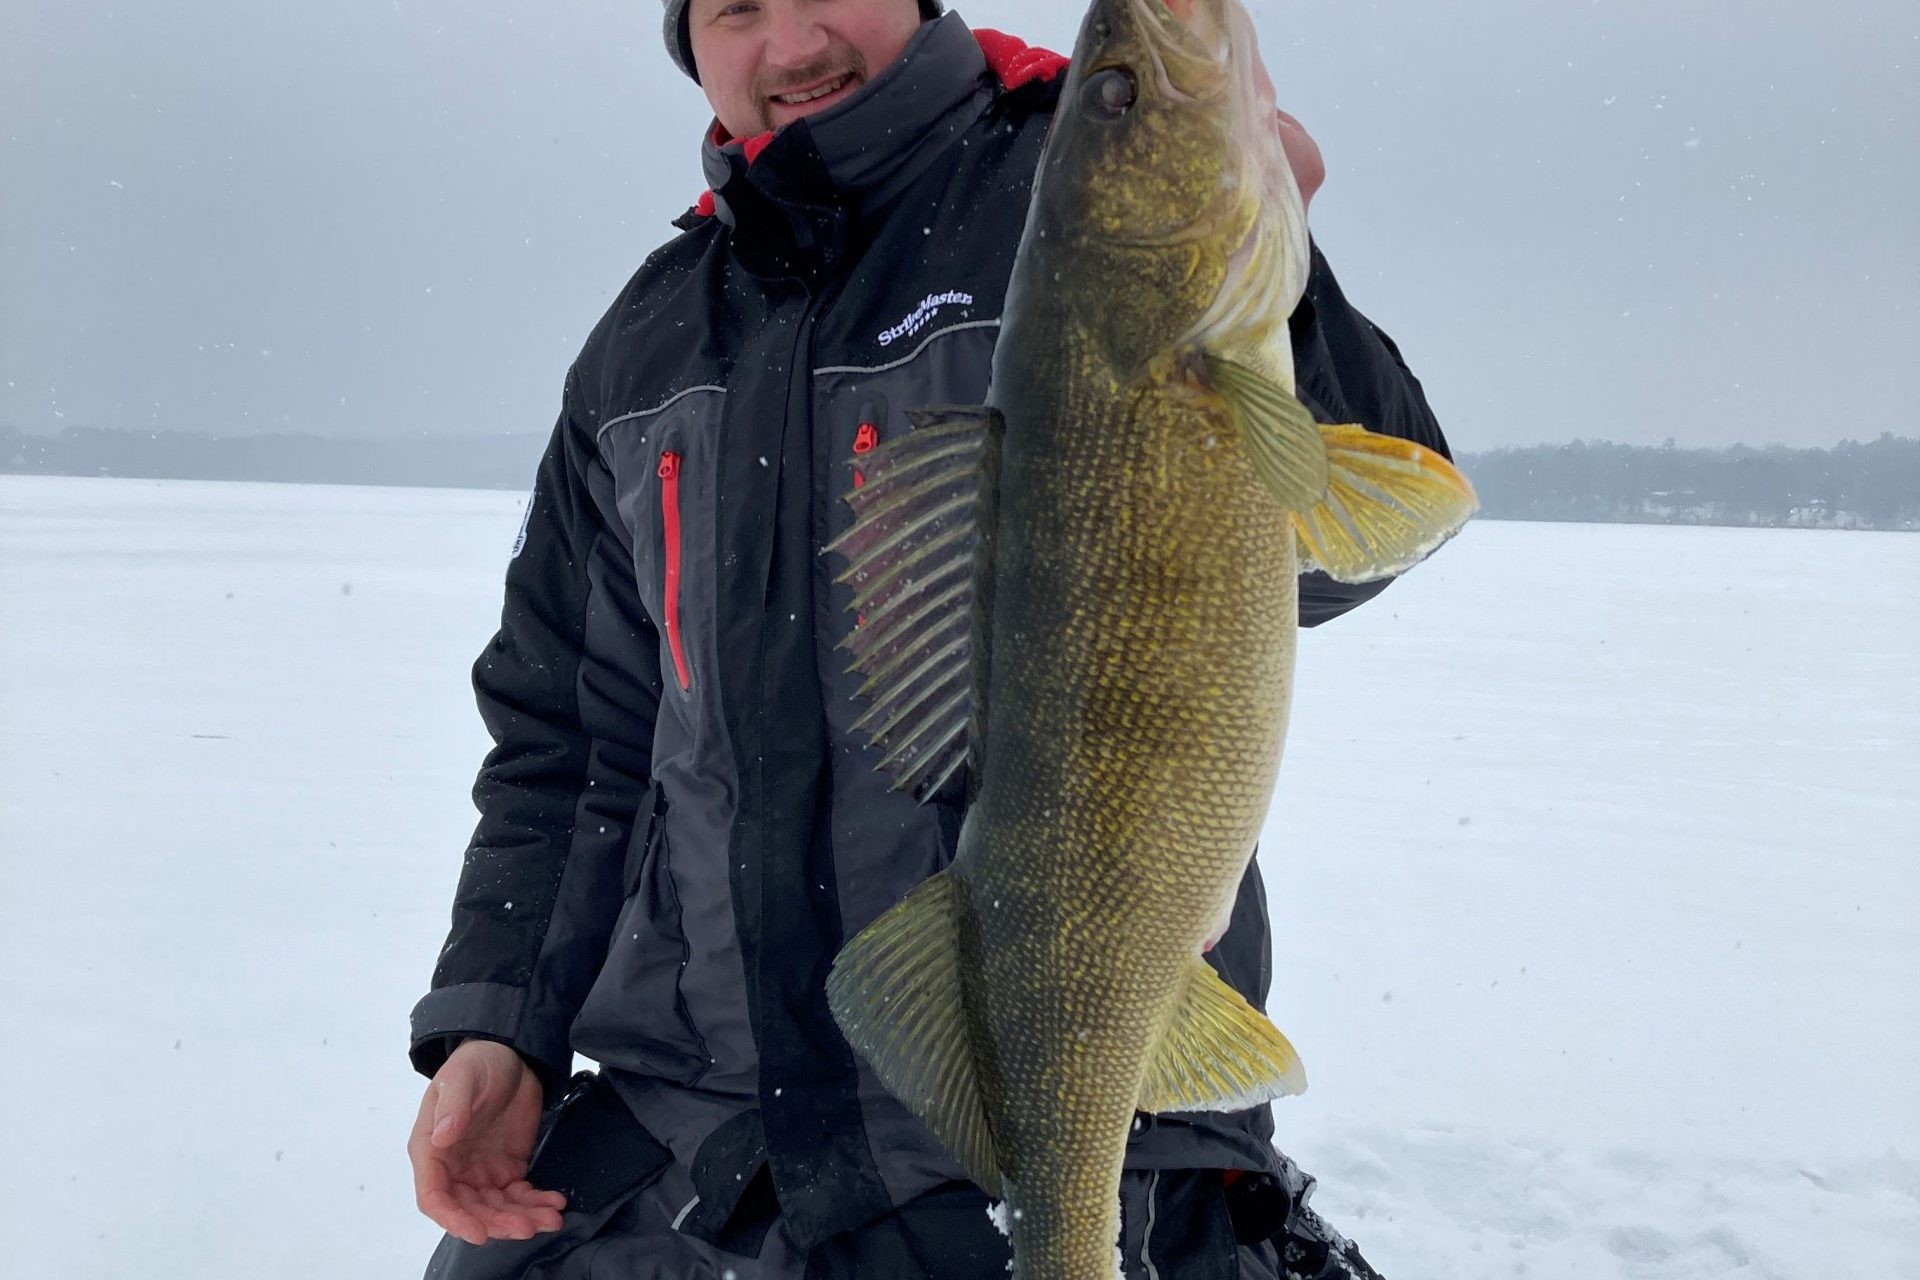 Midwinter Ice Fishing Strategy: Fishing the February Lull - Fish'n Canada